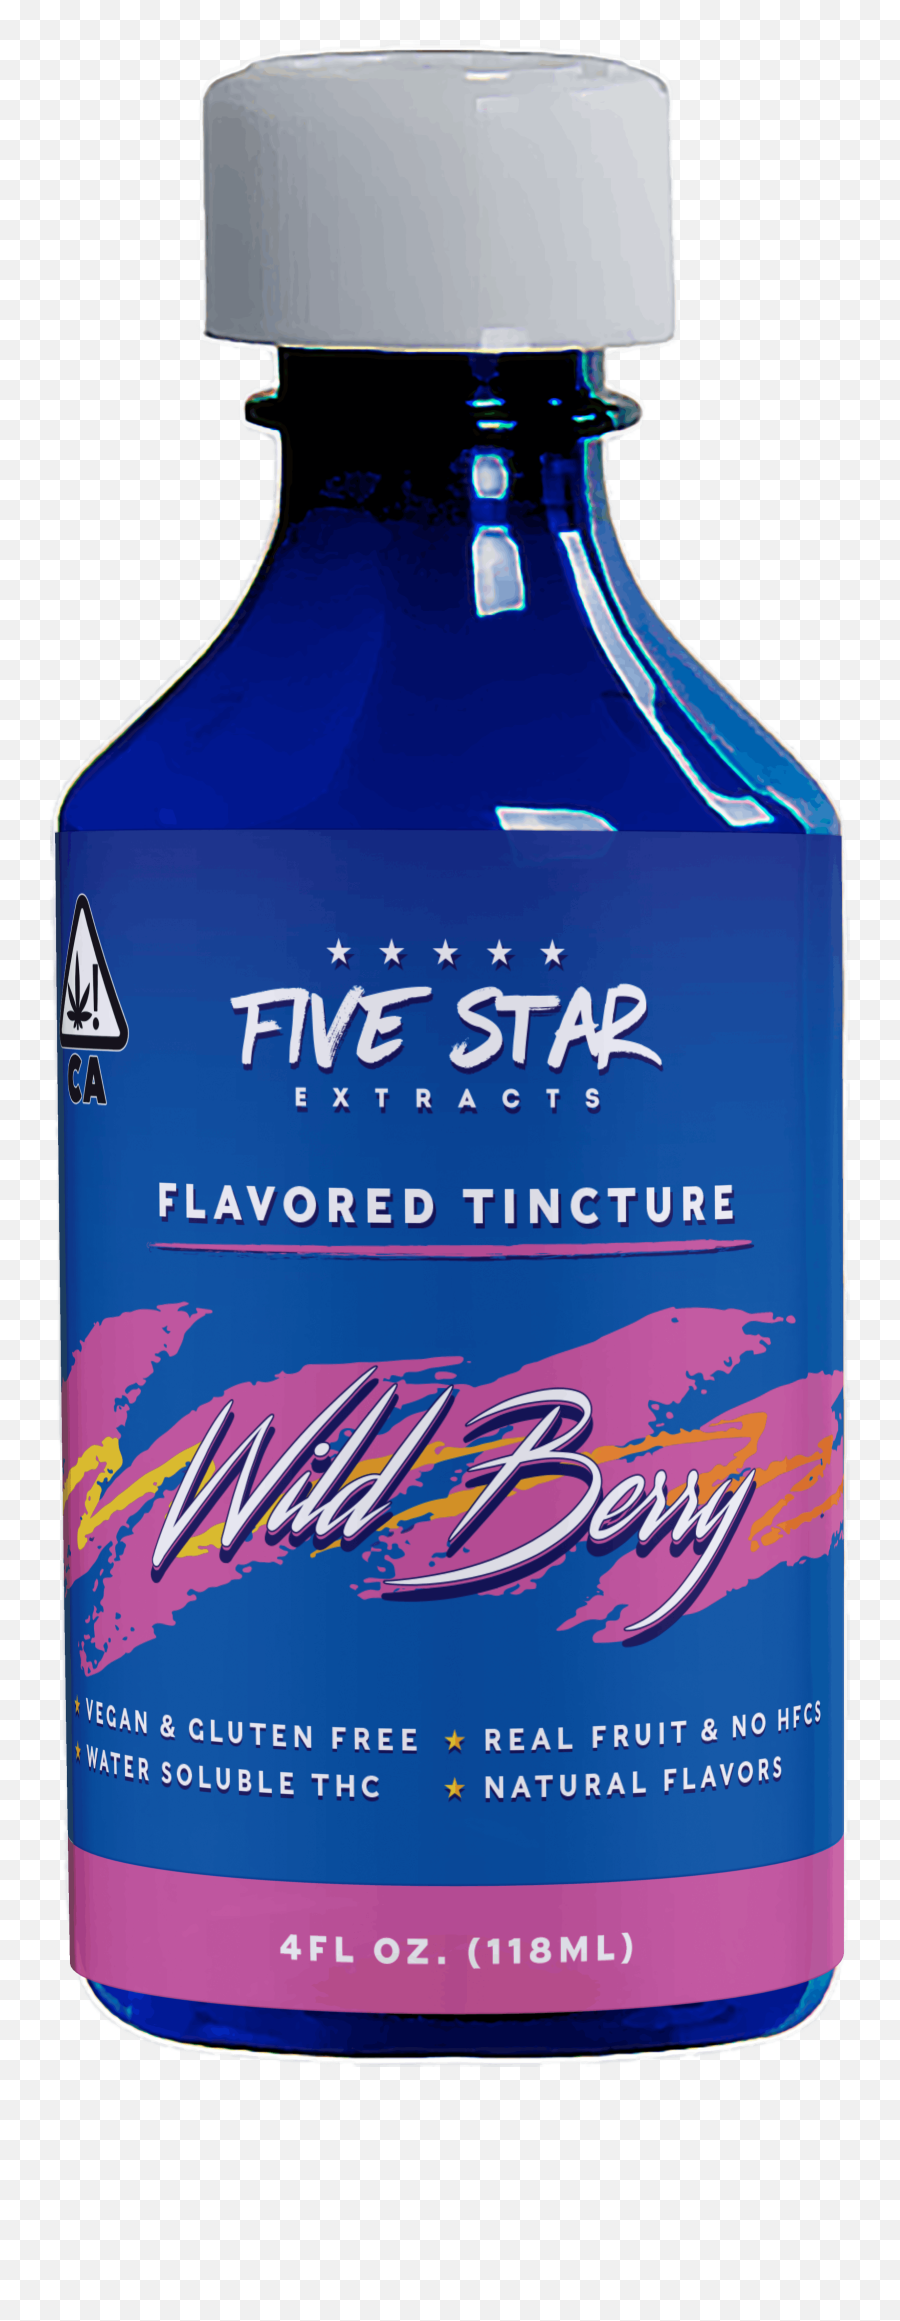 Wild Berry Double Cup Syrup Tincture 400mg Png Lean